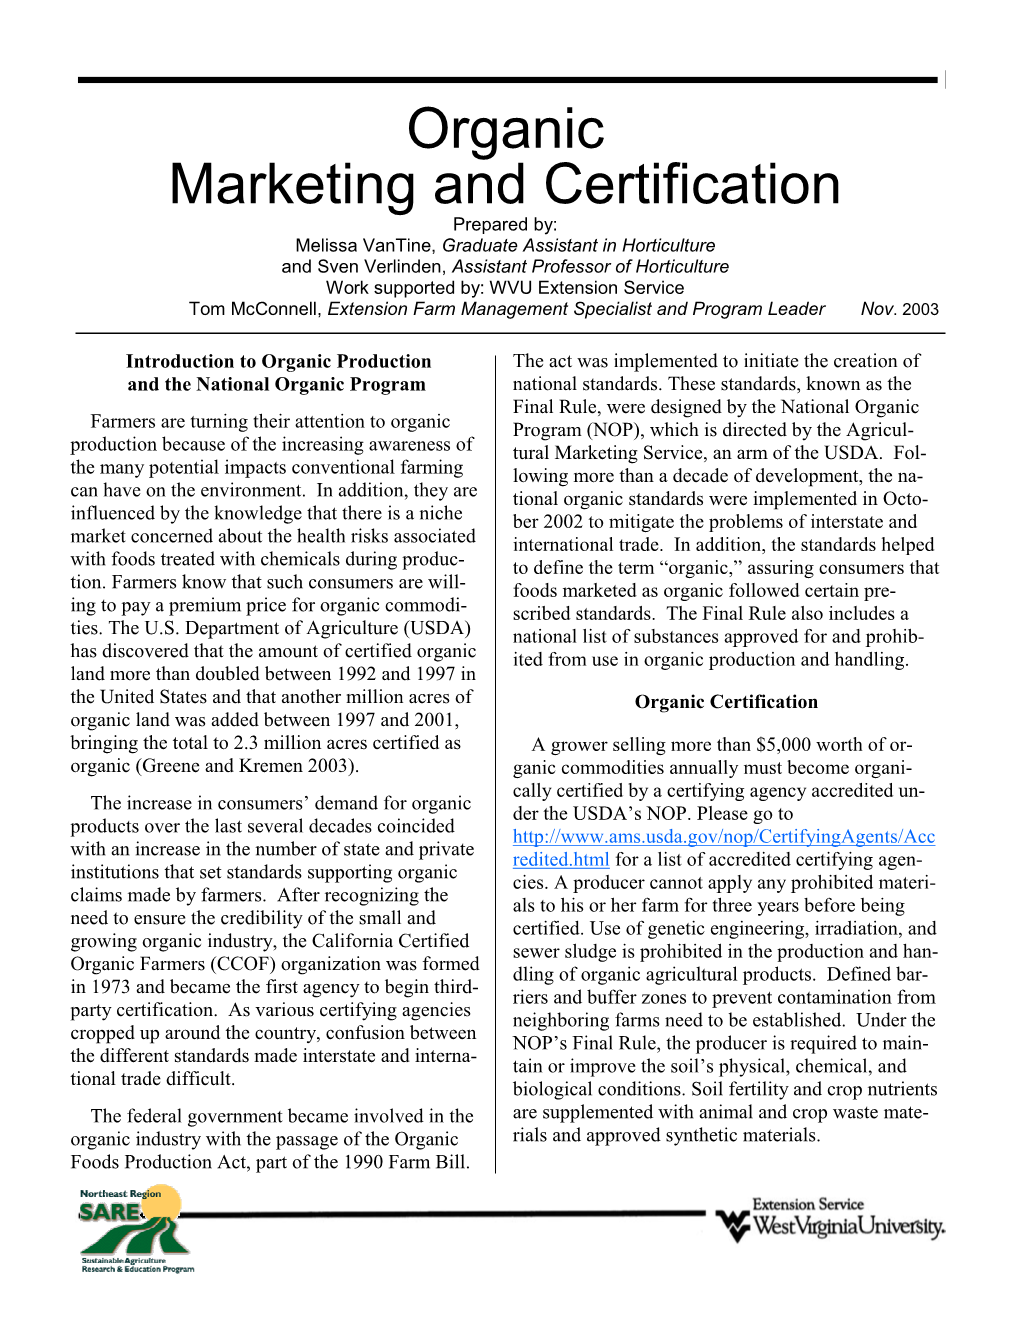 Organic Marketing and Certification